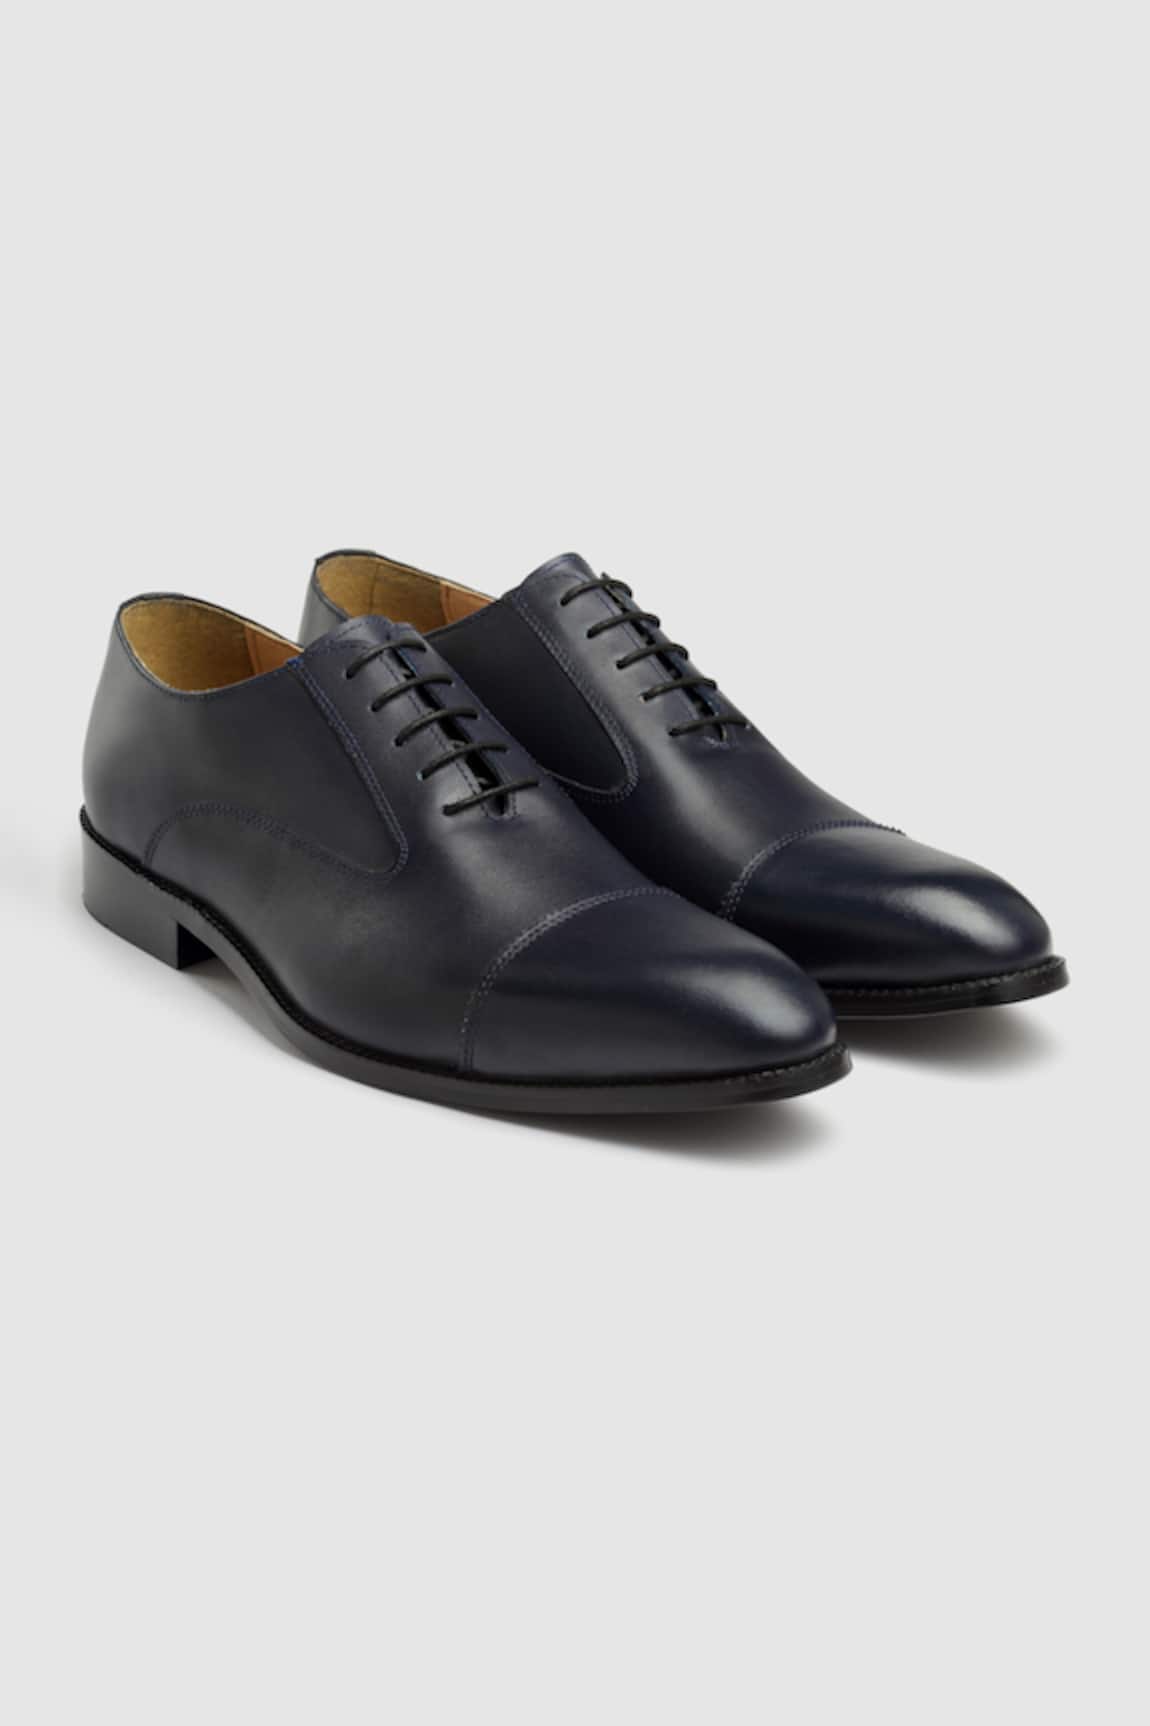 Hats Off Accessories Leather Oxford Shoes